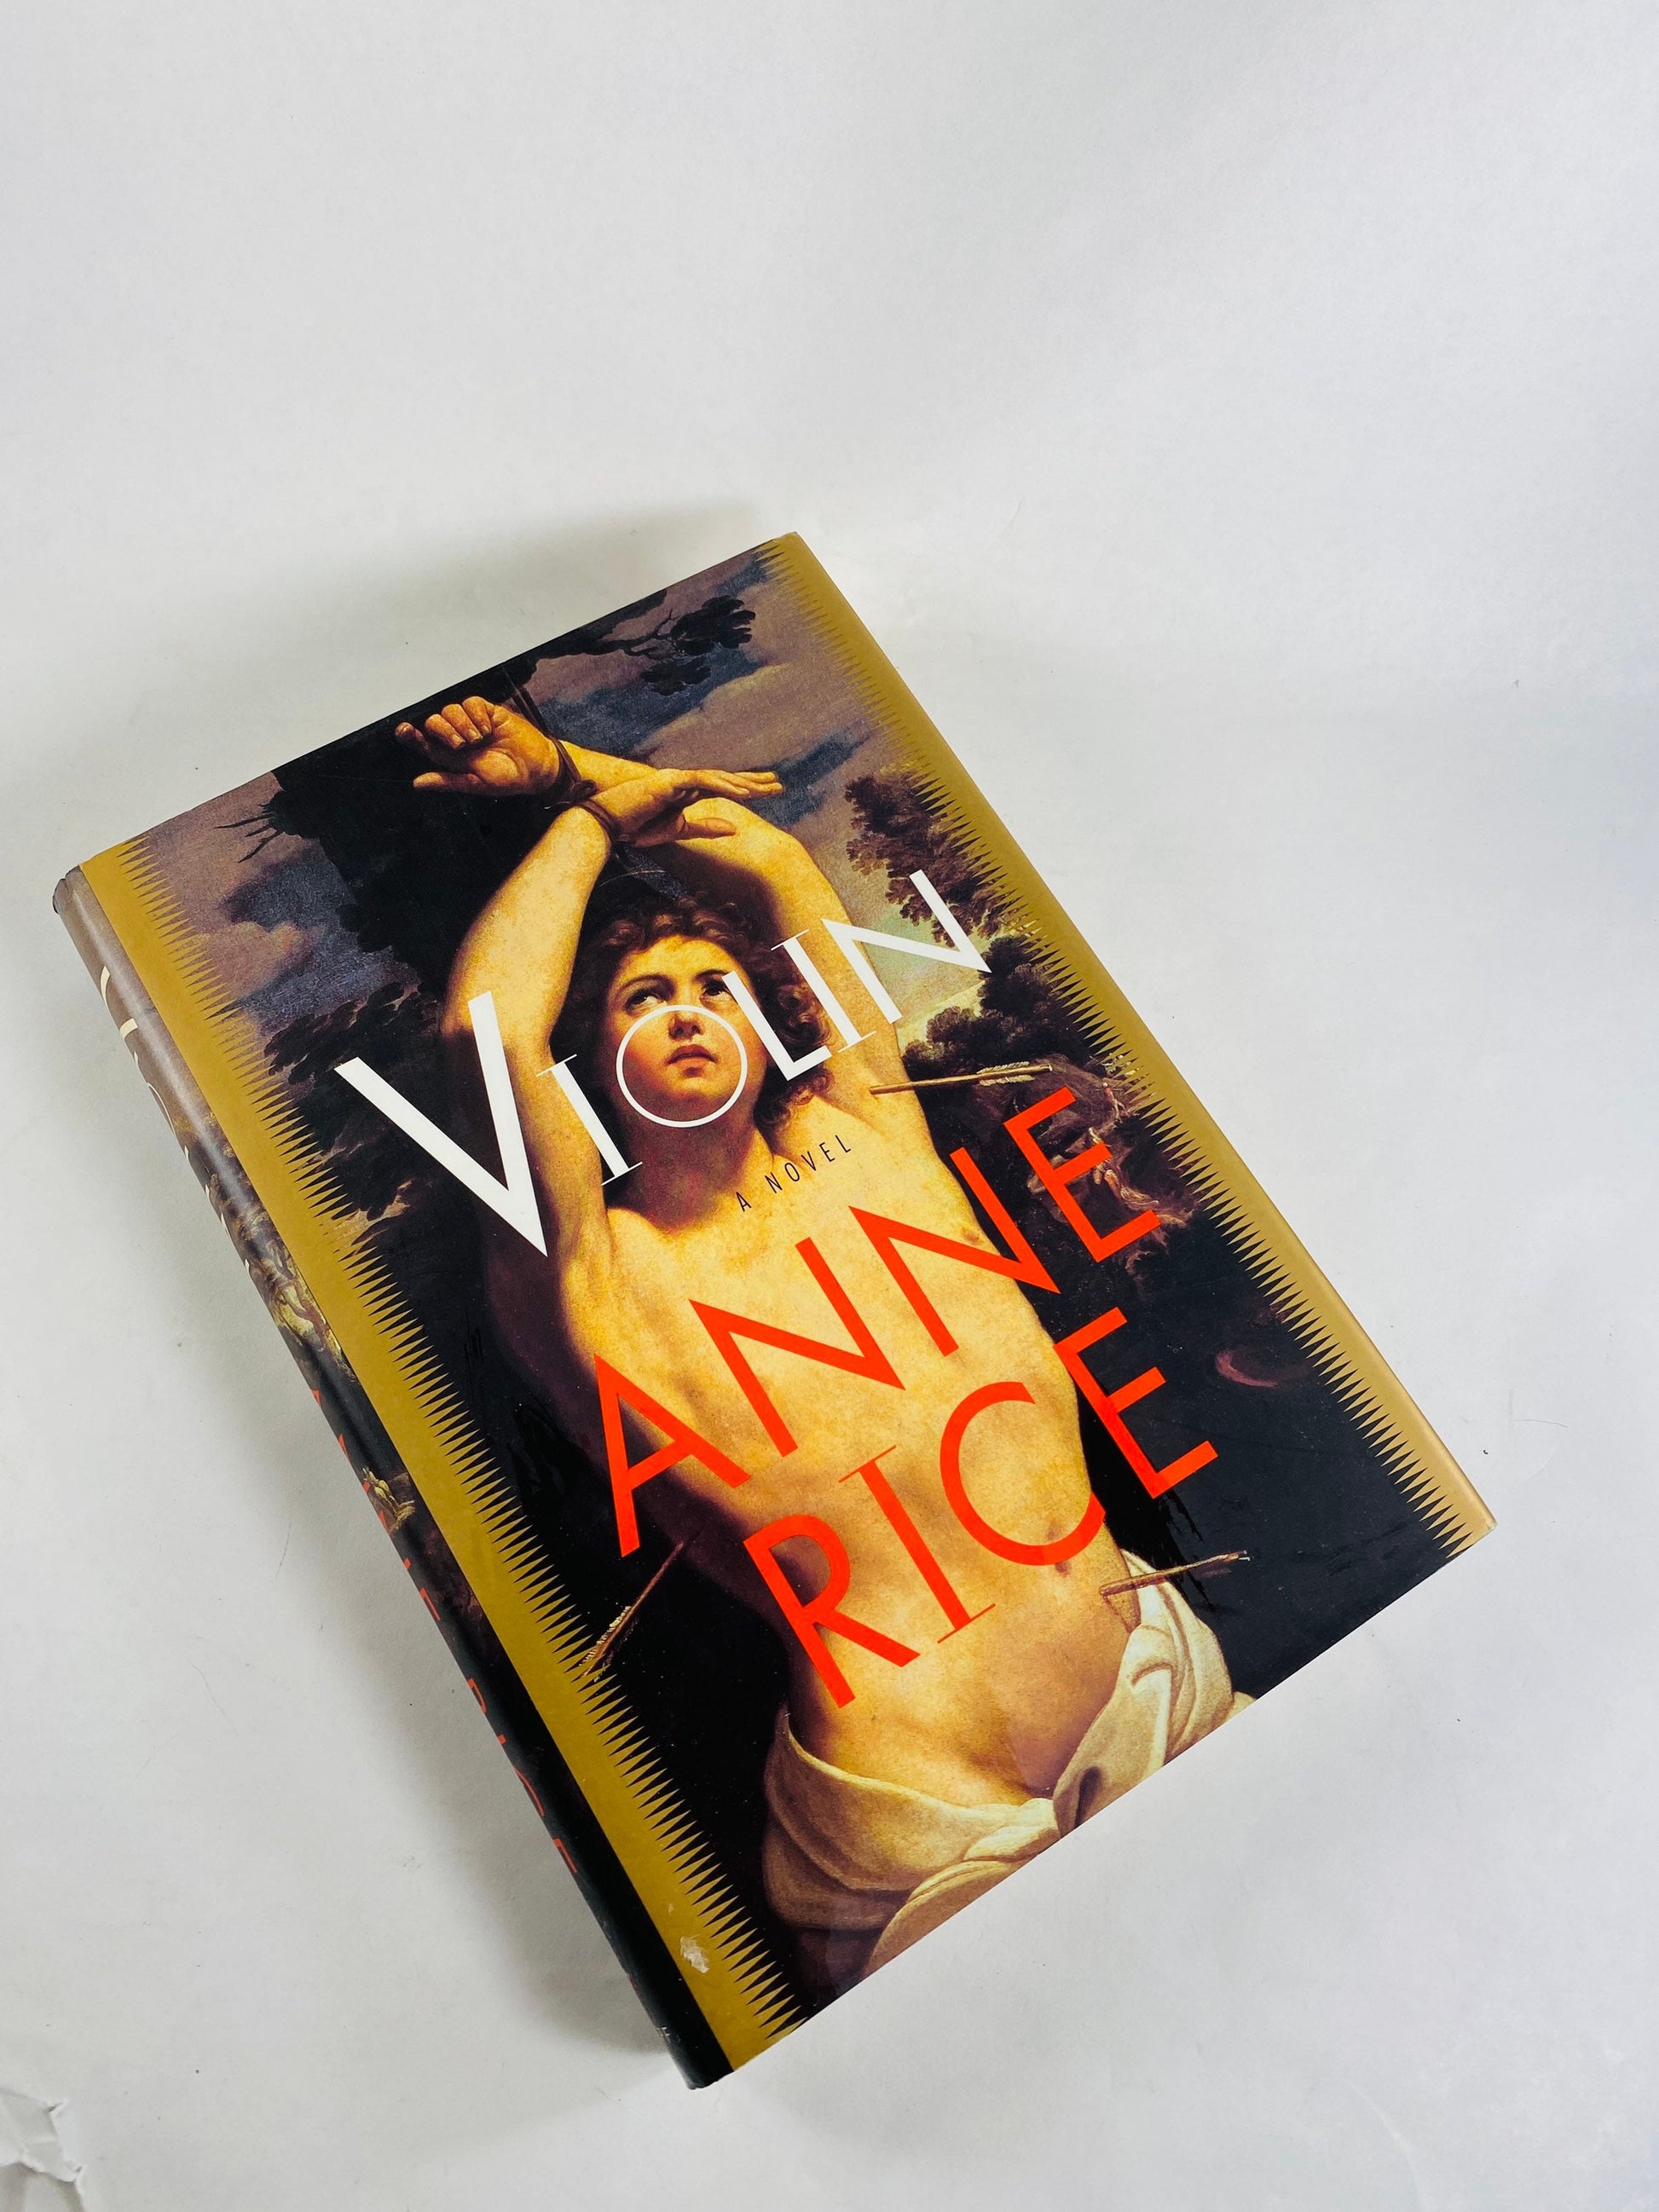 Violin by Anne Rice FIRST EDITION vintage hardcover book circa 1997 Romantic ghost story Historical horror. Collectible gift.